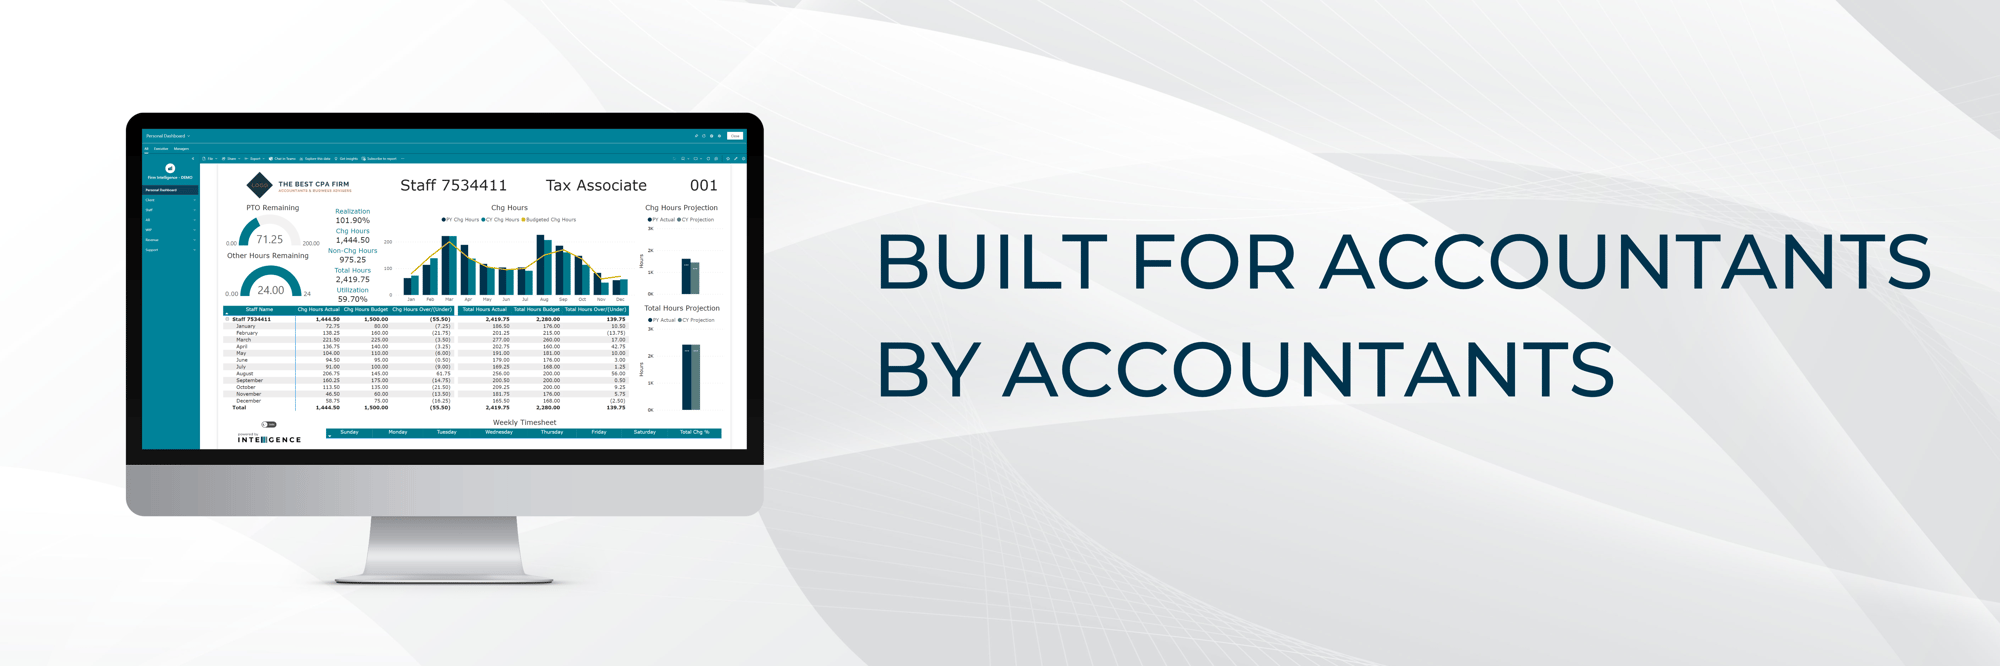 BUILT FOR ACCOUNTANTS BY ACCOUNTANTS (1)